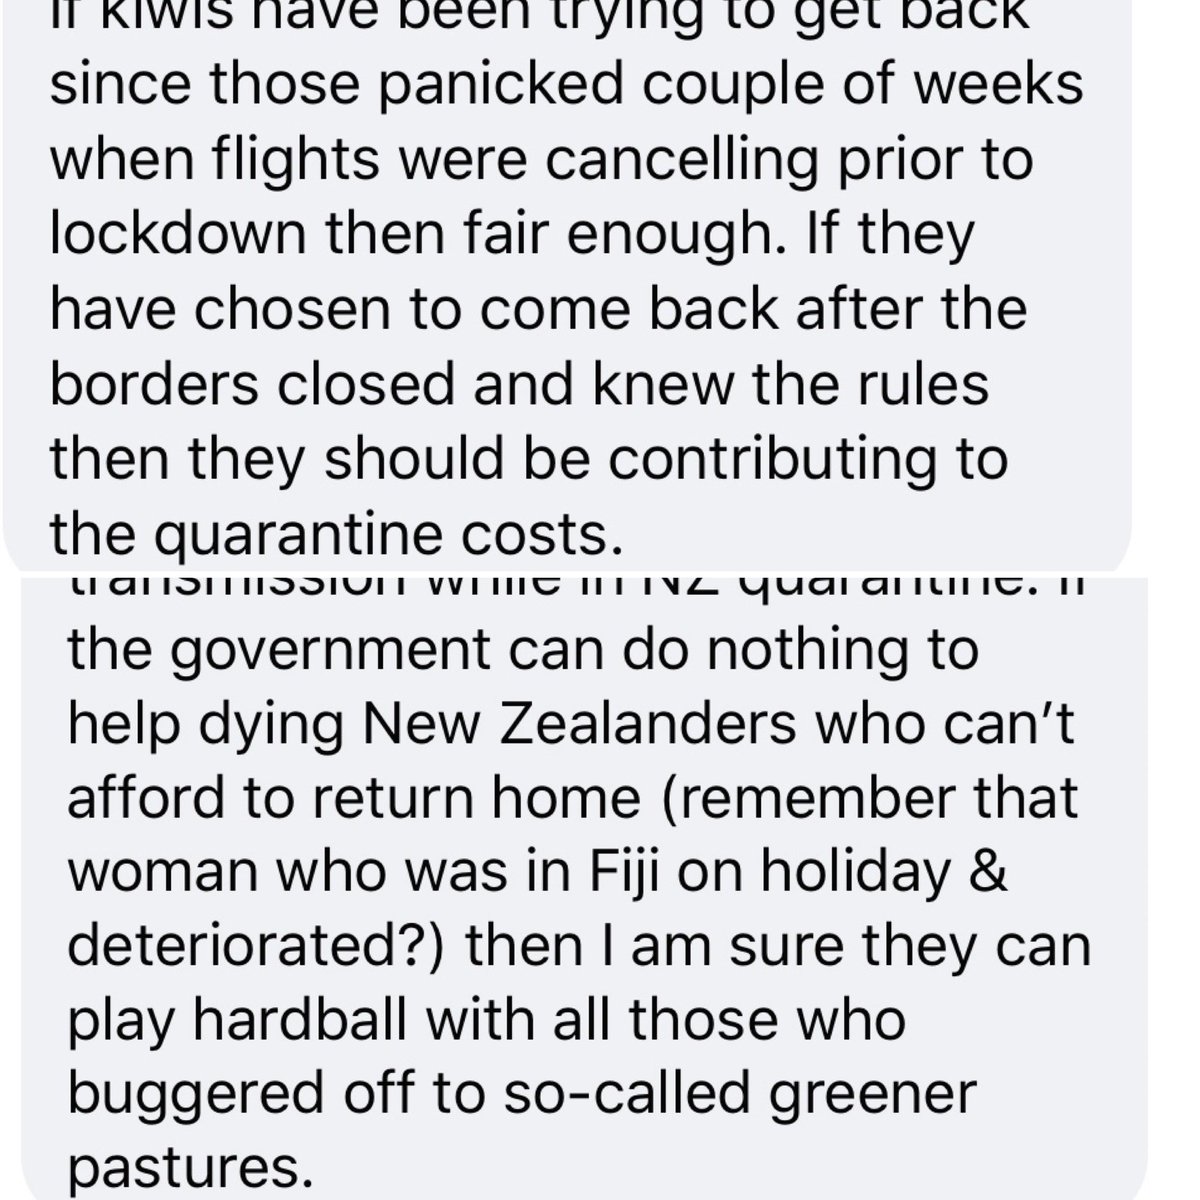 There is a worrying rise in hatred directed at expats returning to NZ & these kind of comments are just wrongThe usual rhetoric seems to be that all expats “buggered off to greener pastures” & have spent the pandemic drinking Aperols in Italy or partying in Mykonos (Thread)